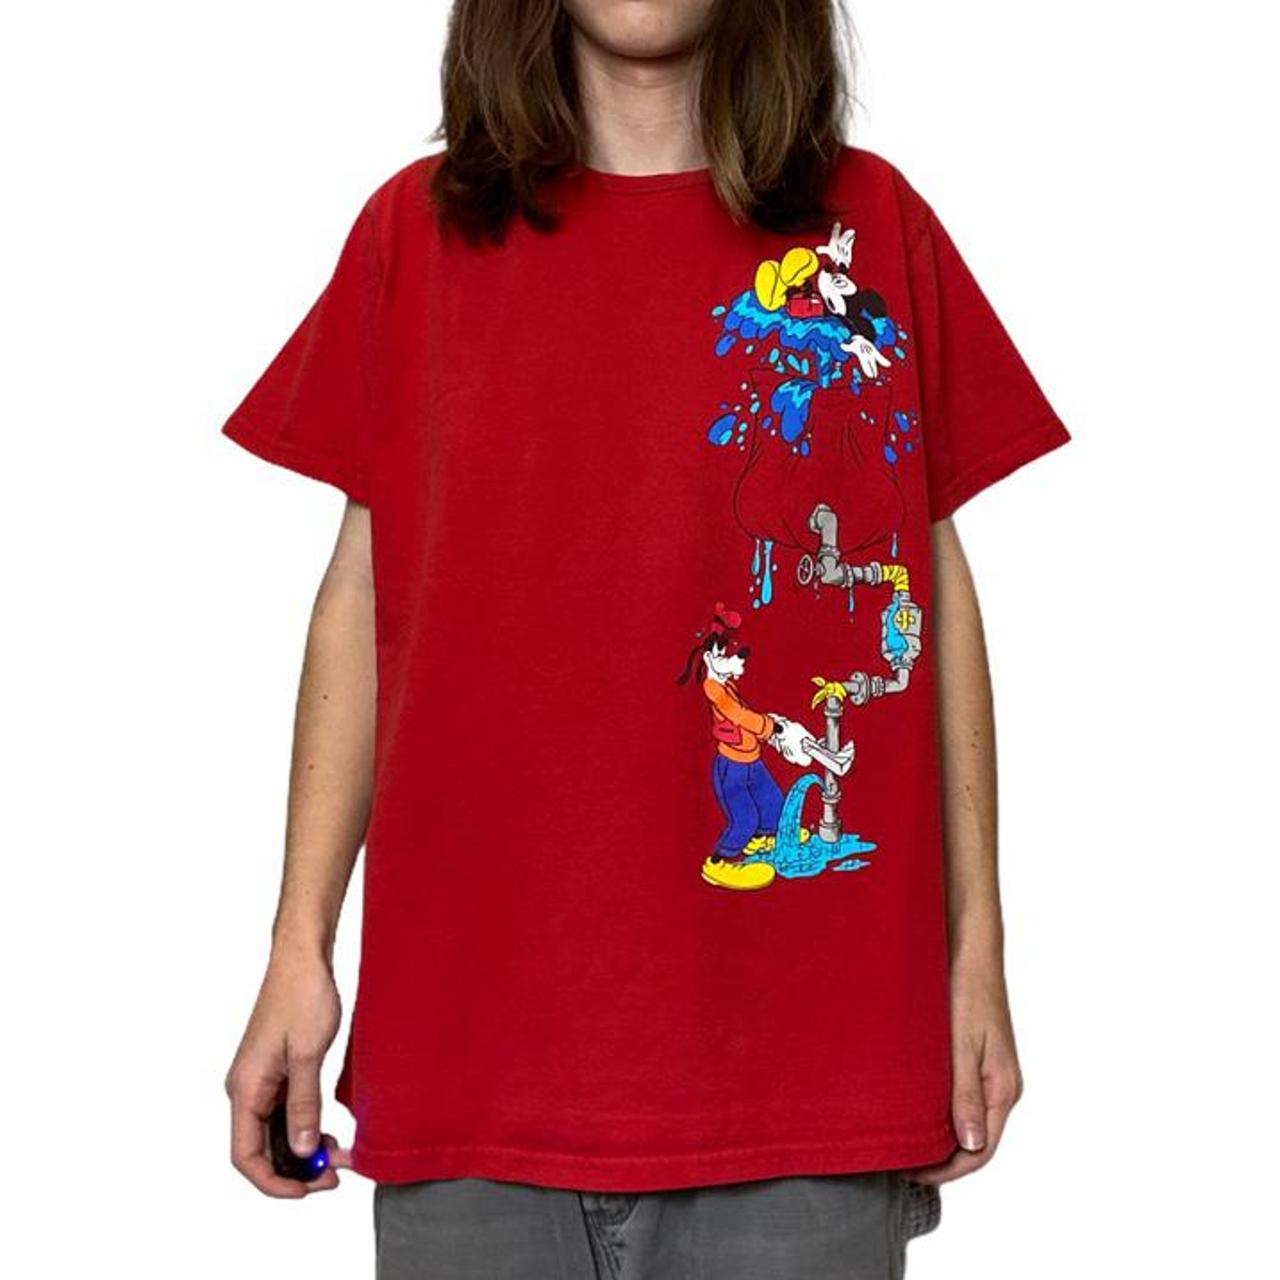 Disney Men's Red and Blue T-shirt